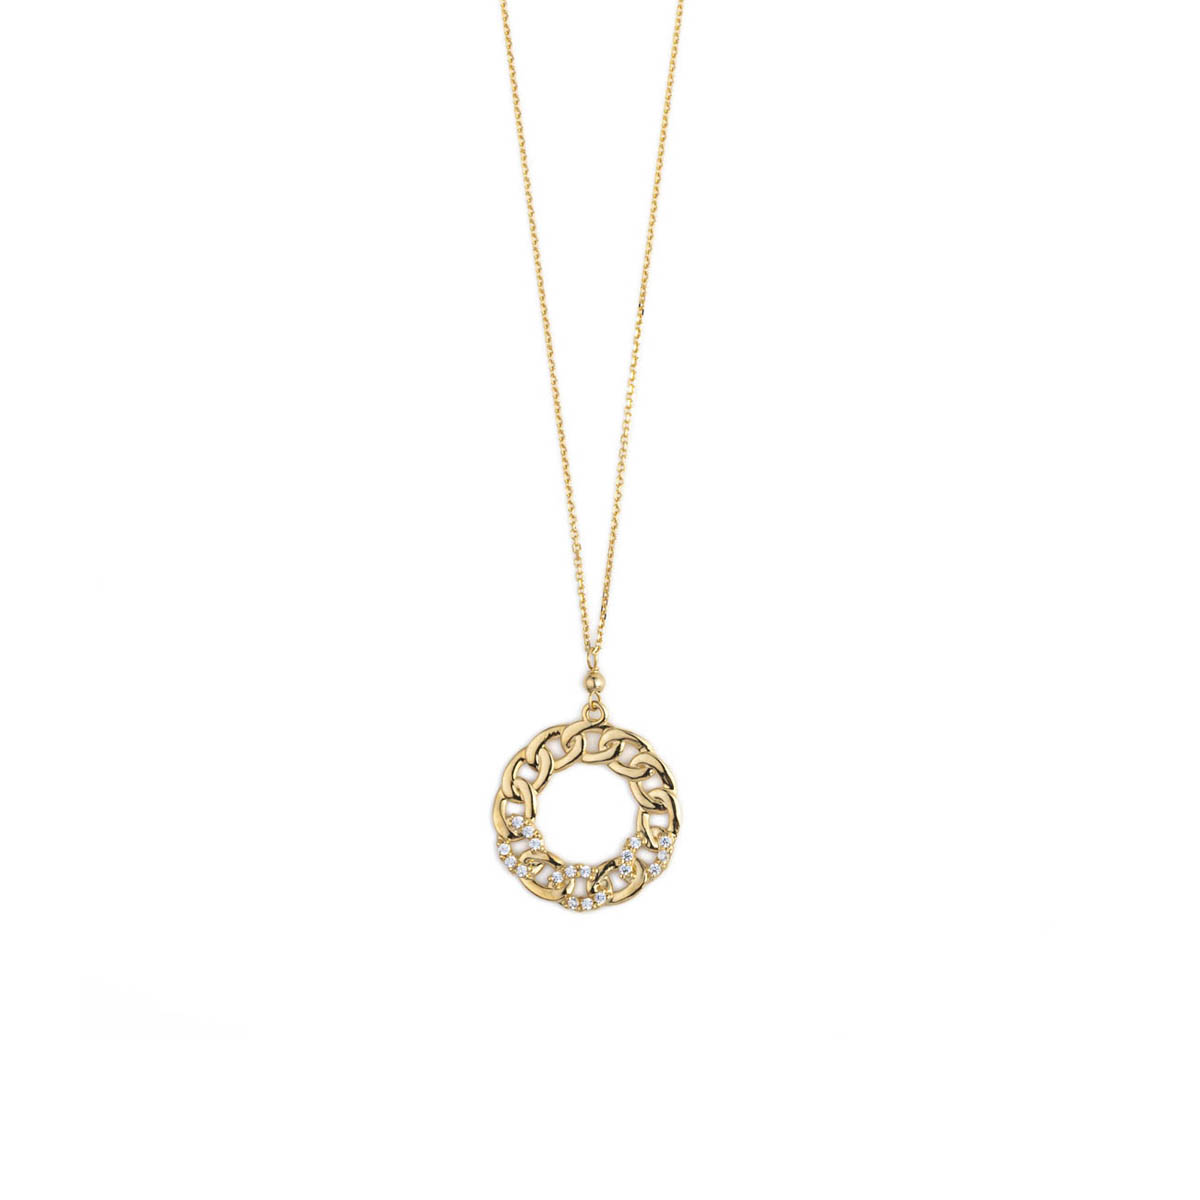 Crystal Wreath Necklace - 14K Gold